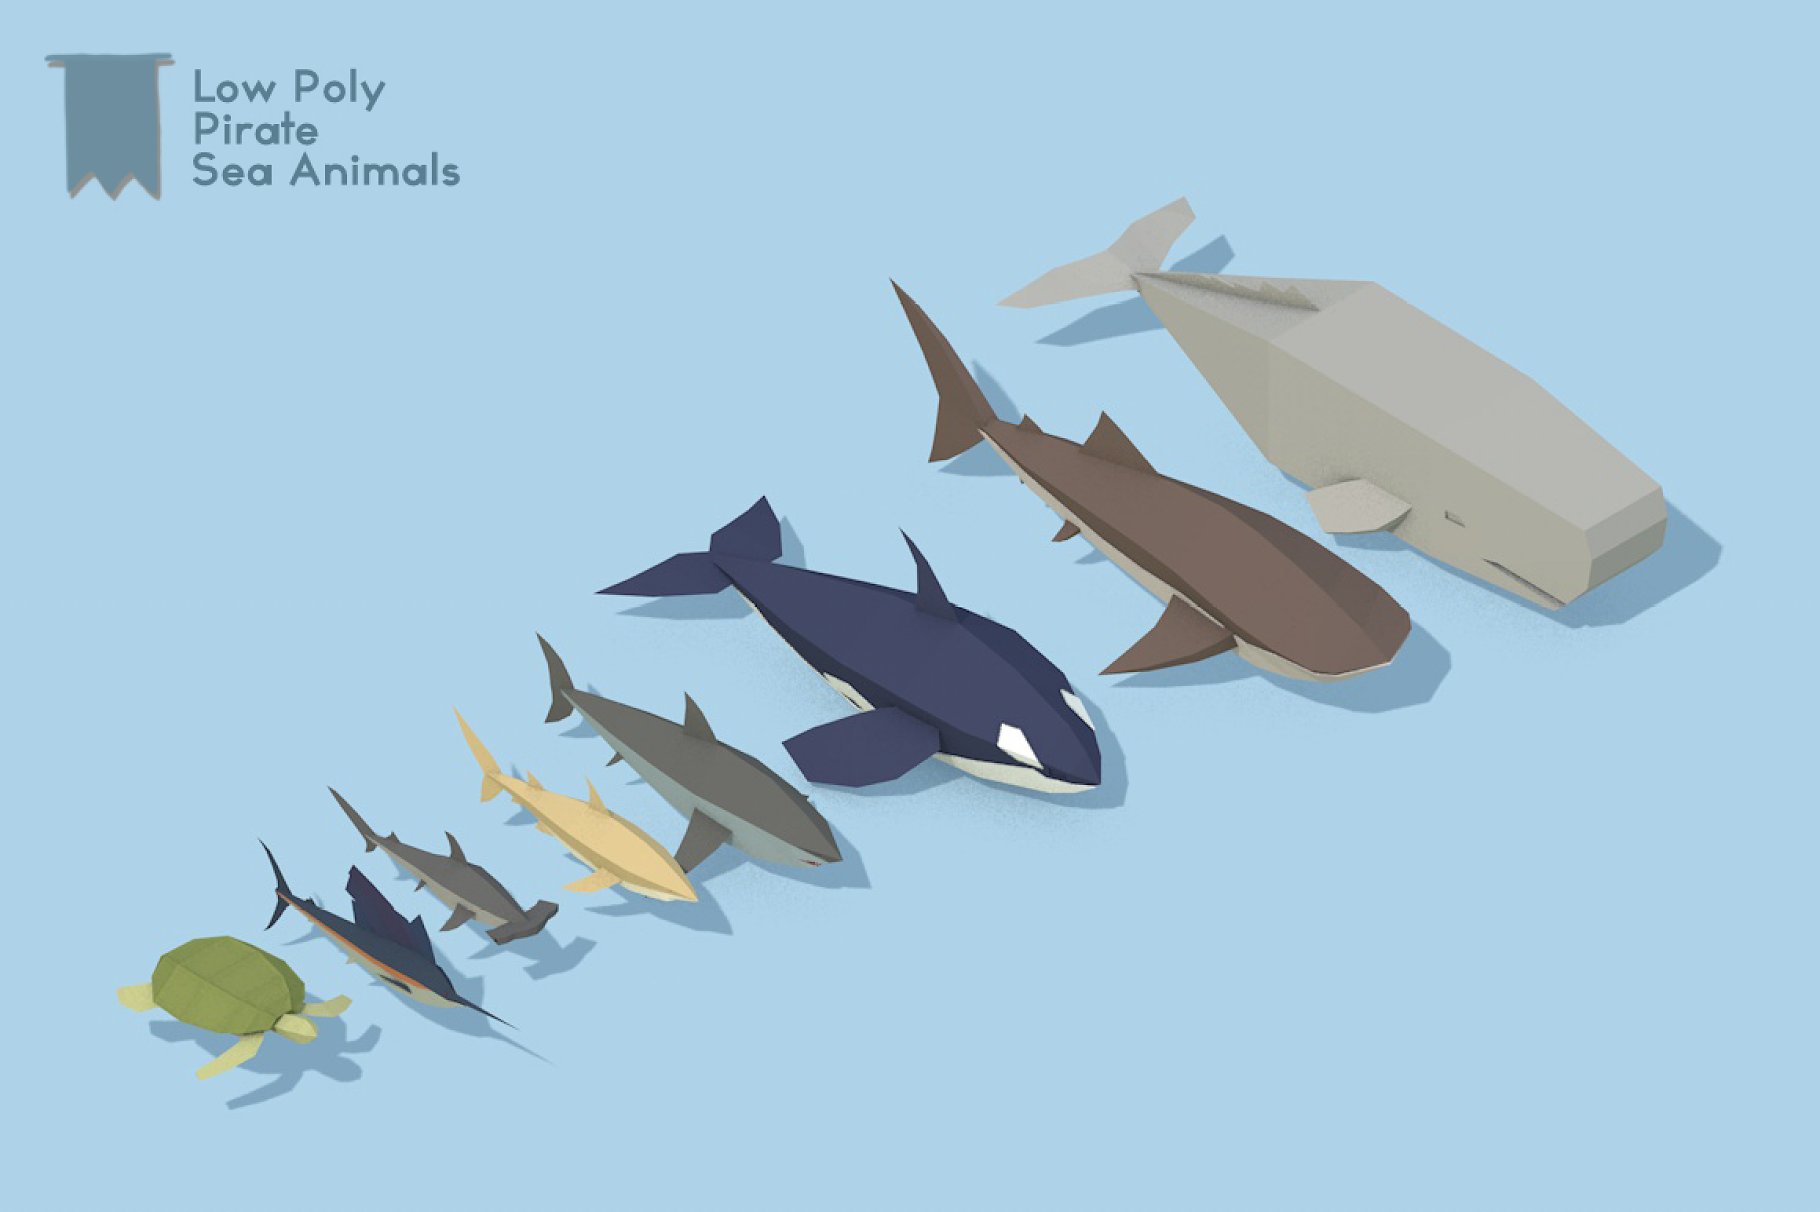 Colorful illustrations of low poly pirate sea animals on a light blue background.